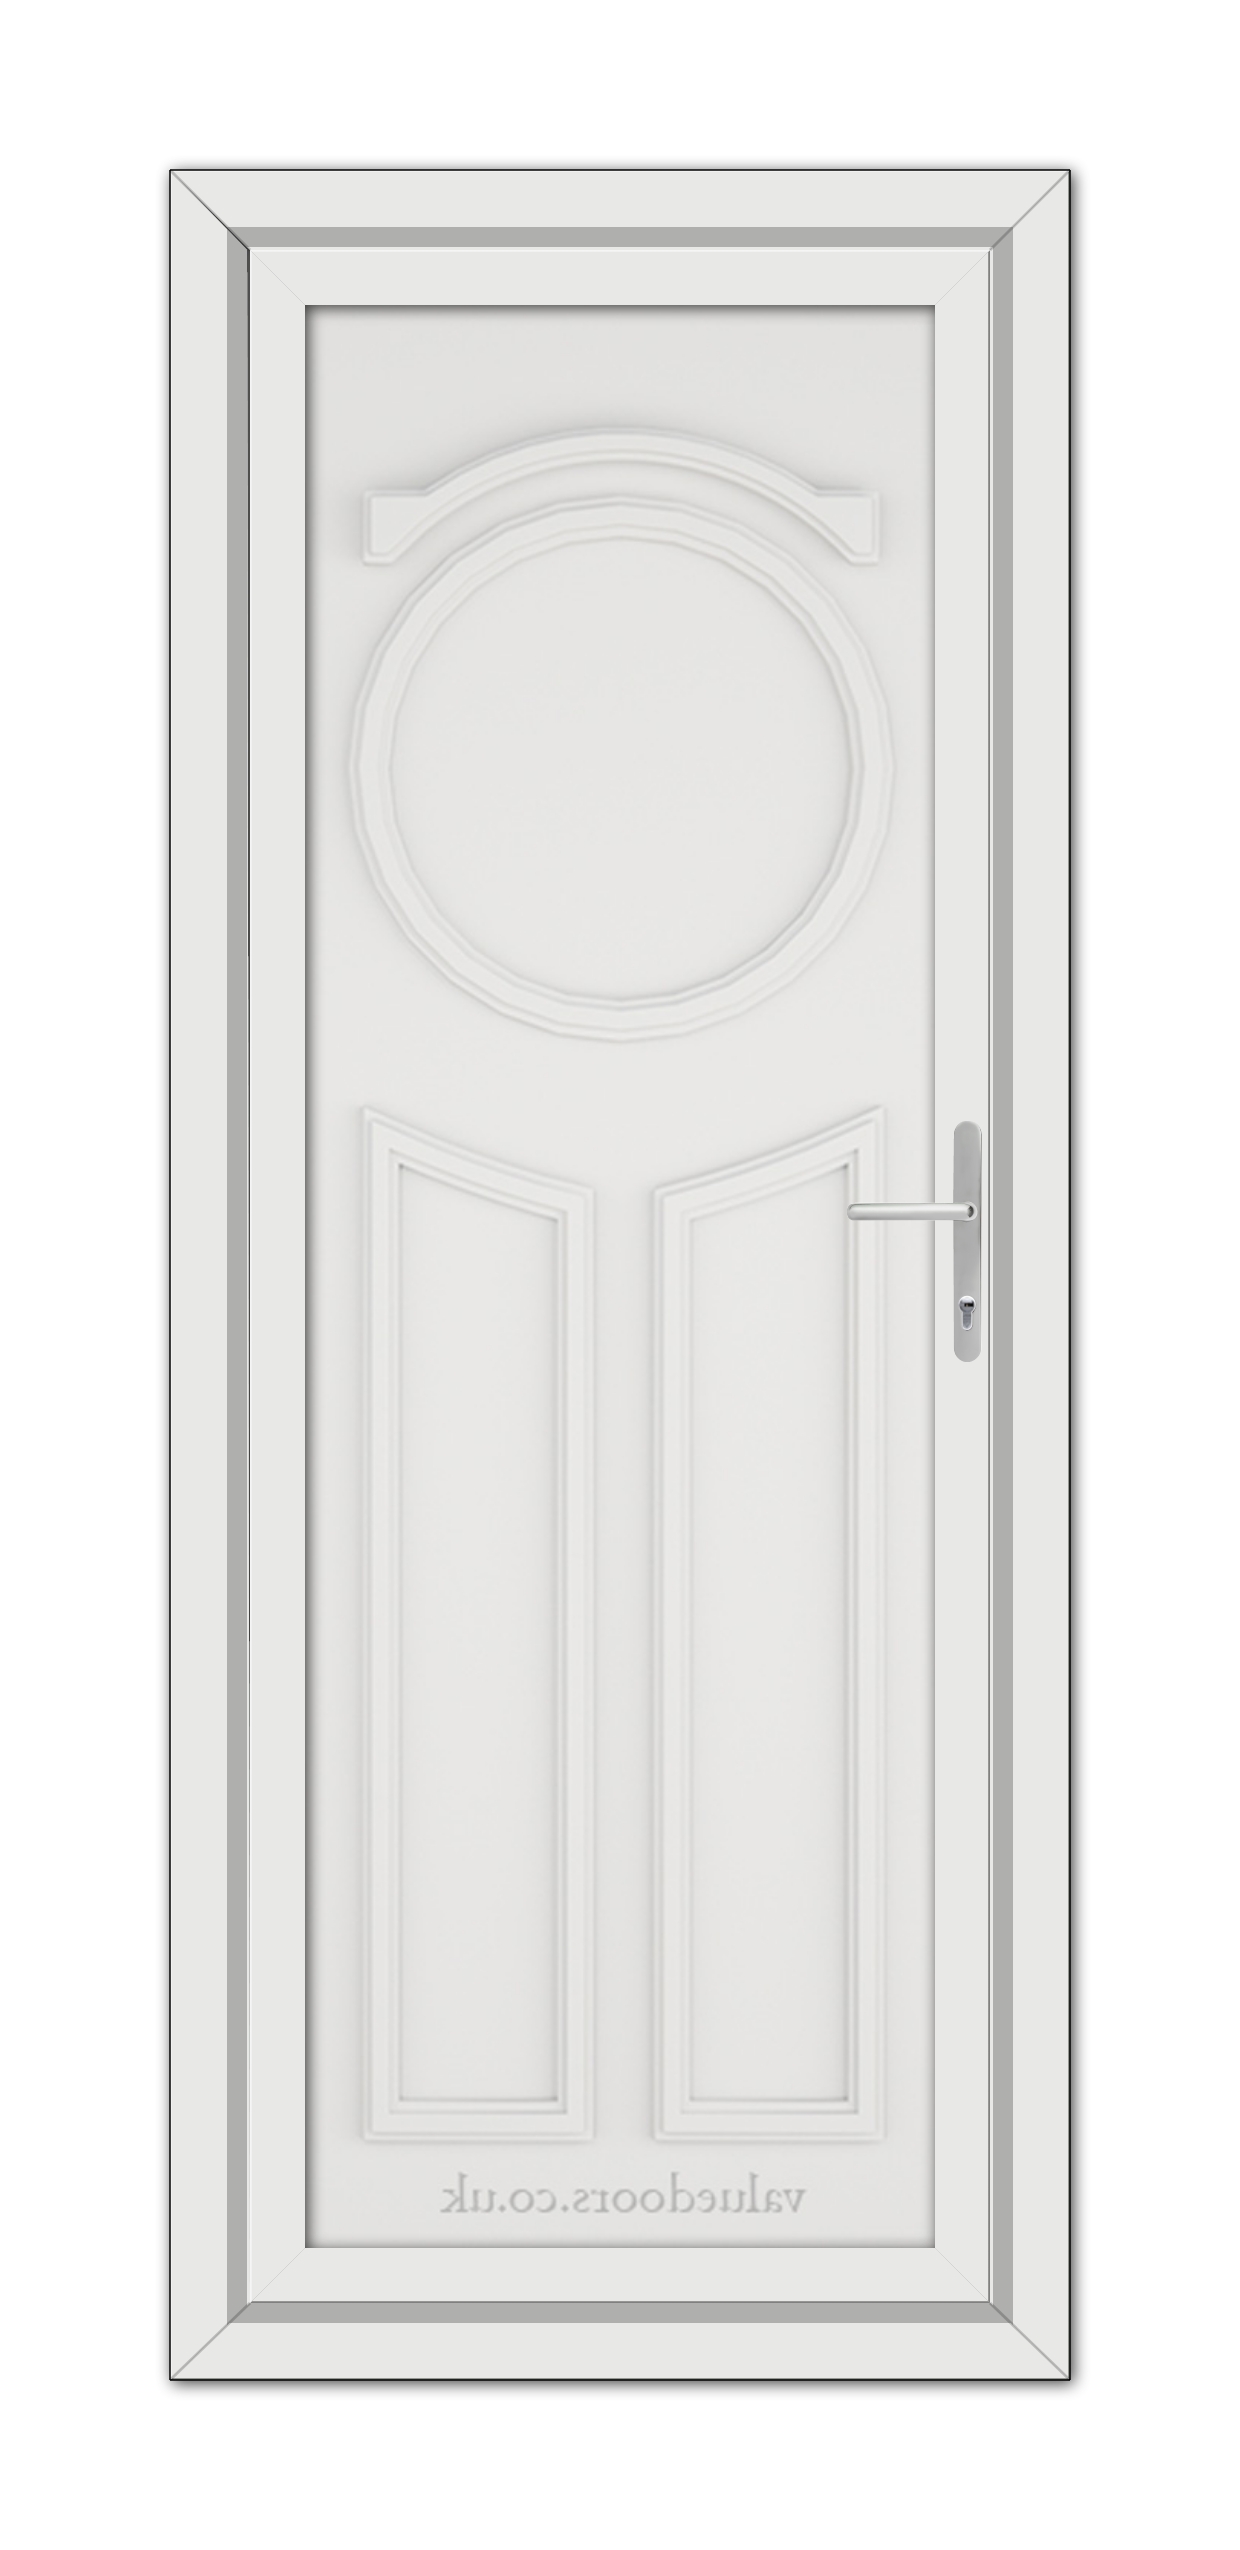 White Blenheim Solid uPVC Door with a circular window at the top and a modern handle, positioned vertically within a frame.